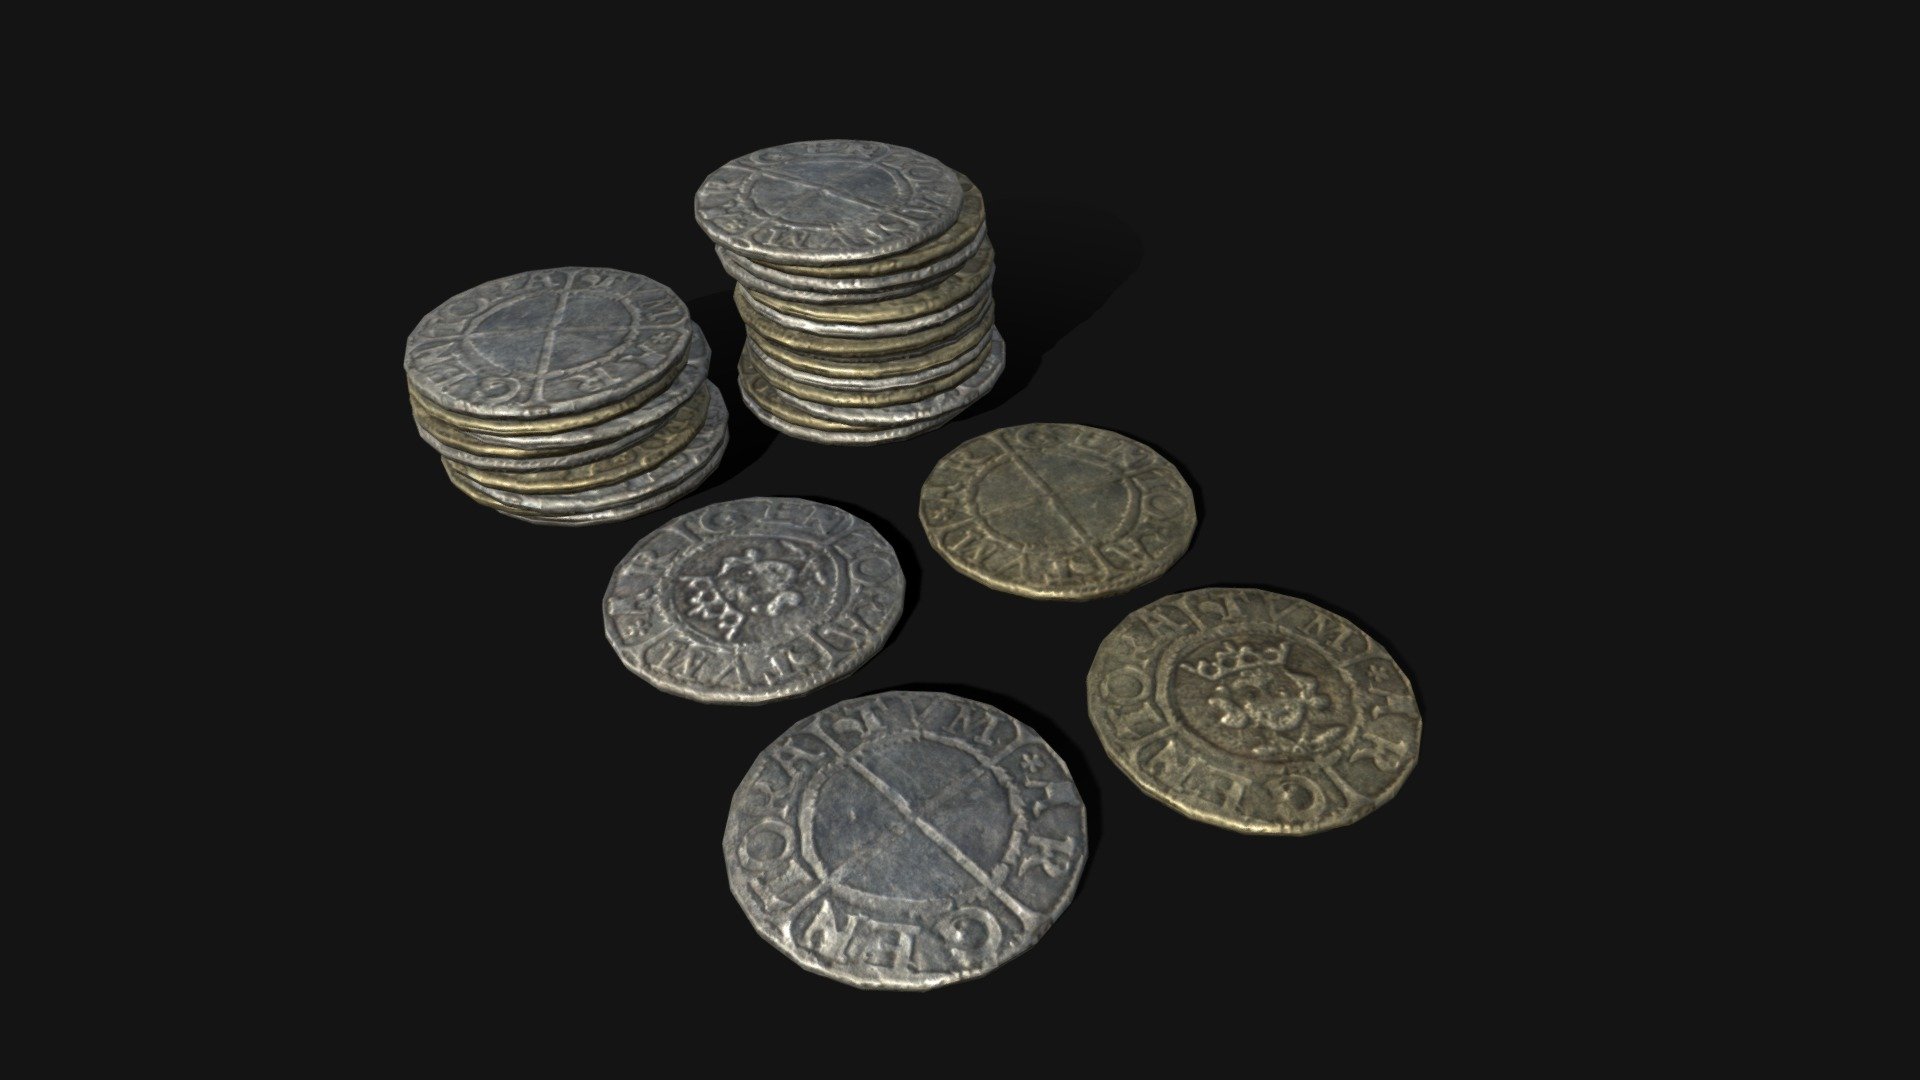 Medieval Coins  3D Model. This model contains the Medieval Coins  itself 

All modeled in Maya, textured with Substance Painter.

The model was built to scale and is UV unwrapped properly. Contains one 4K texture set

⦁   240 tris. 

⦁   Contains: .FBX .OBJ and .DAE

⦁   Model has clean topology. No Ngons.

⦁   Built to scale

⦁   Unwrapped UV Map

⦁   4K Texture set

⦁   High quality details

⦁   Based on real life references

⦁   Renders done in Marmoset Toolbag

Polycount: 

Verts 124

Edges 280 

Faces 160

Tris 240

If you have any questions please feel free to ask me 3d model